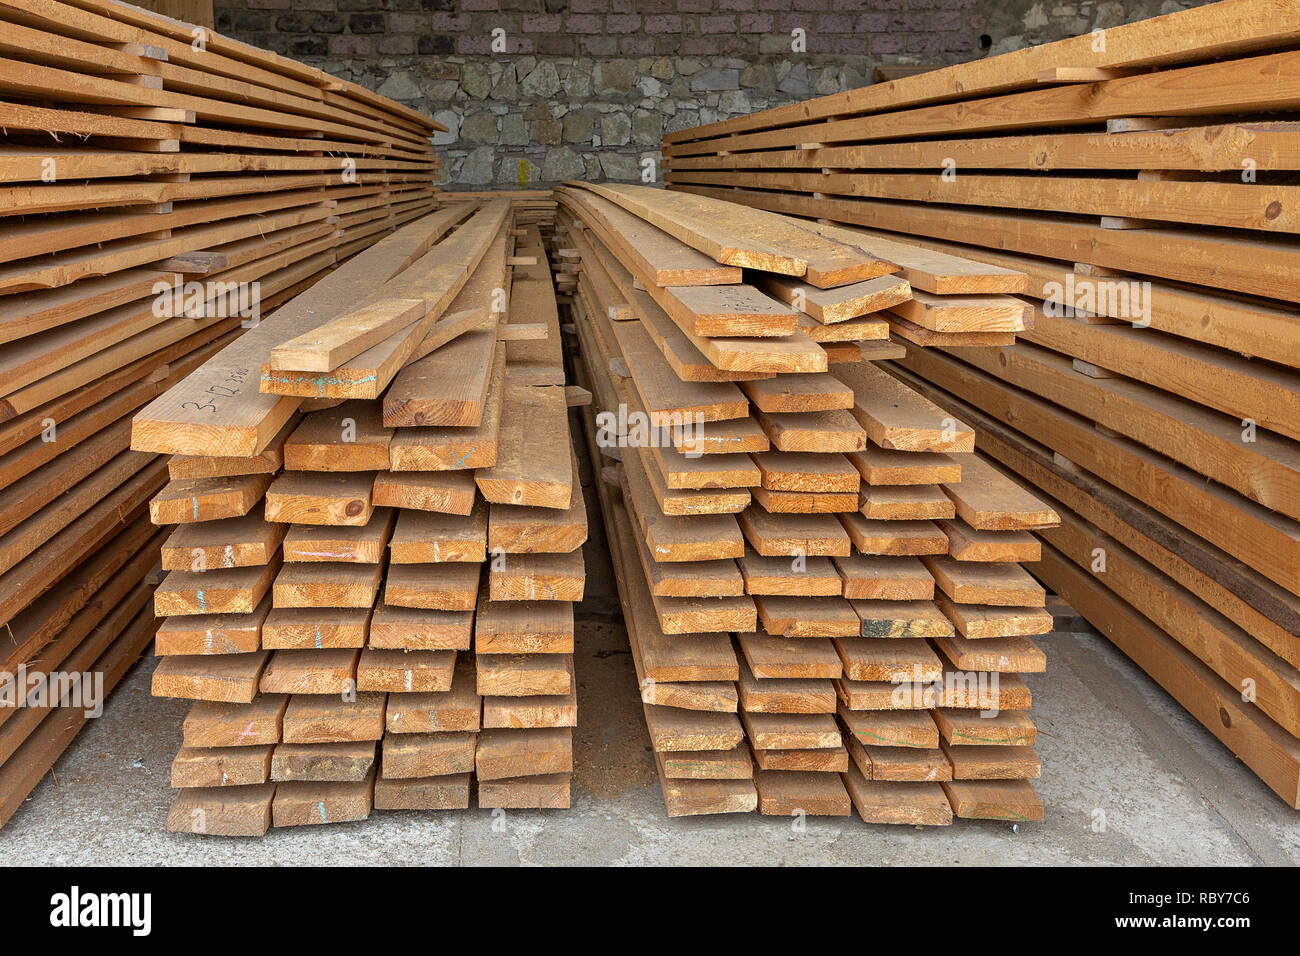 Stacked lumber ready to be sent to customers. Stock Photo